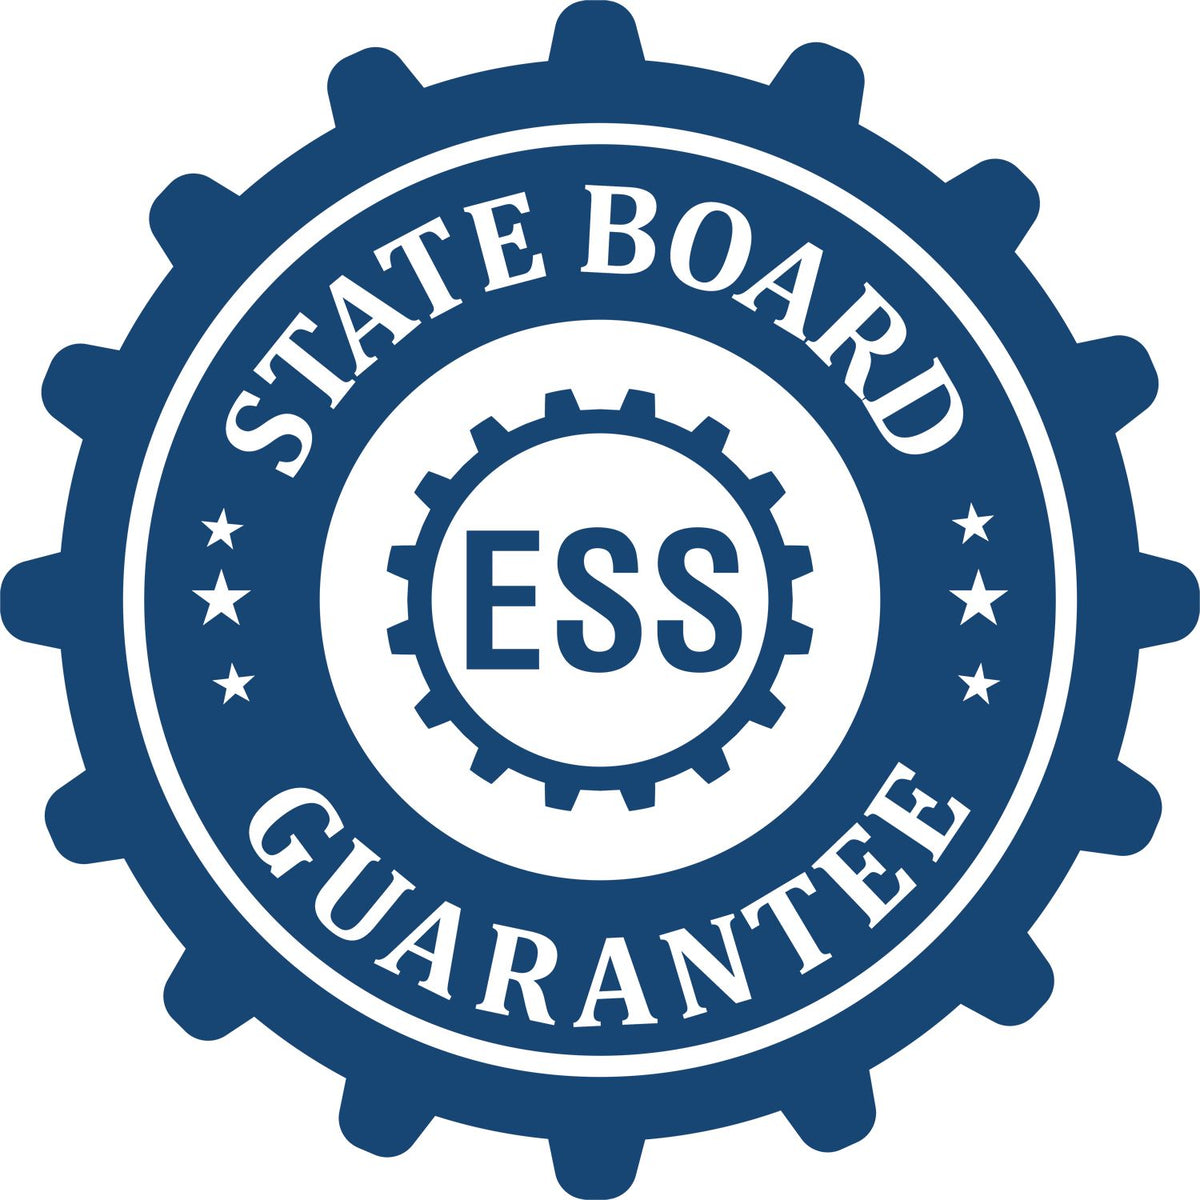 An emblem in a gear shape illustrating a state board guarantee for the Digital Virginia Landscape Architect Stamp product.